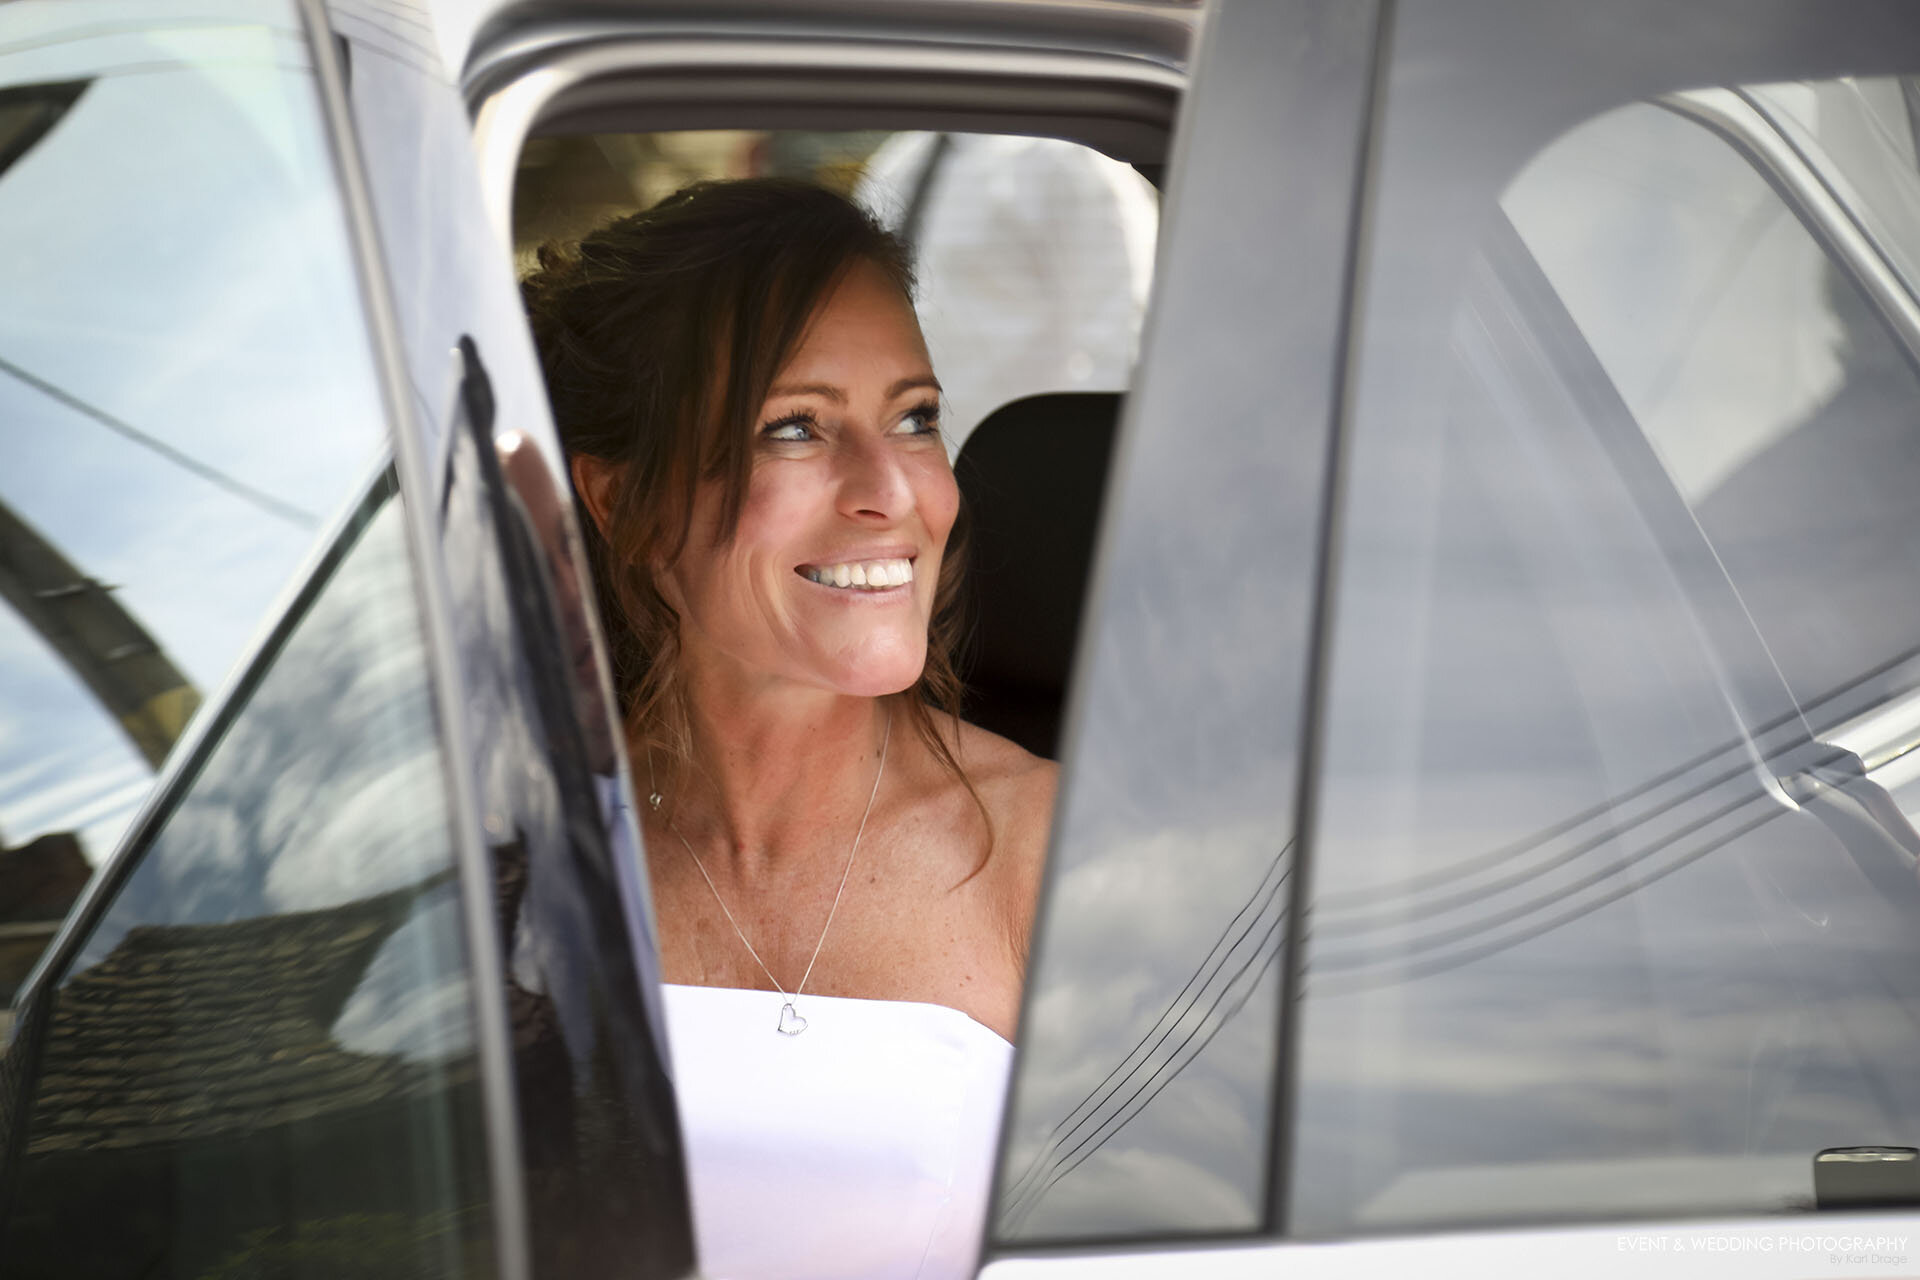 Smiling bride arriving at the church on her wedding day